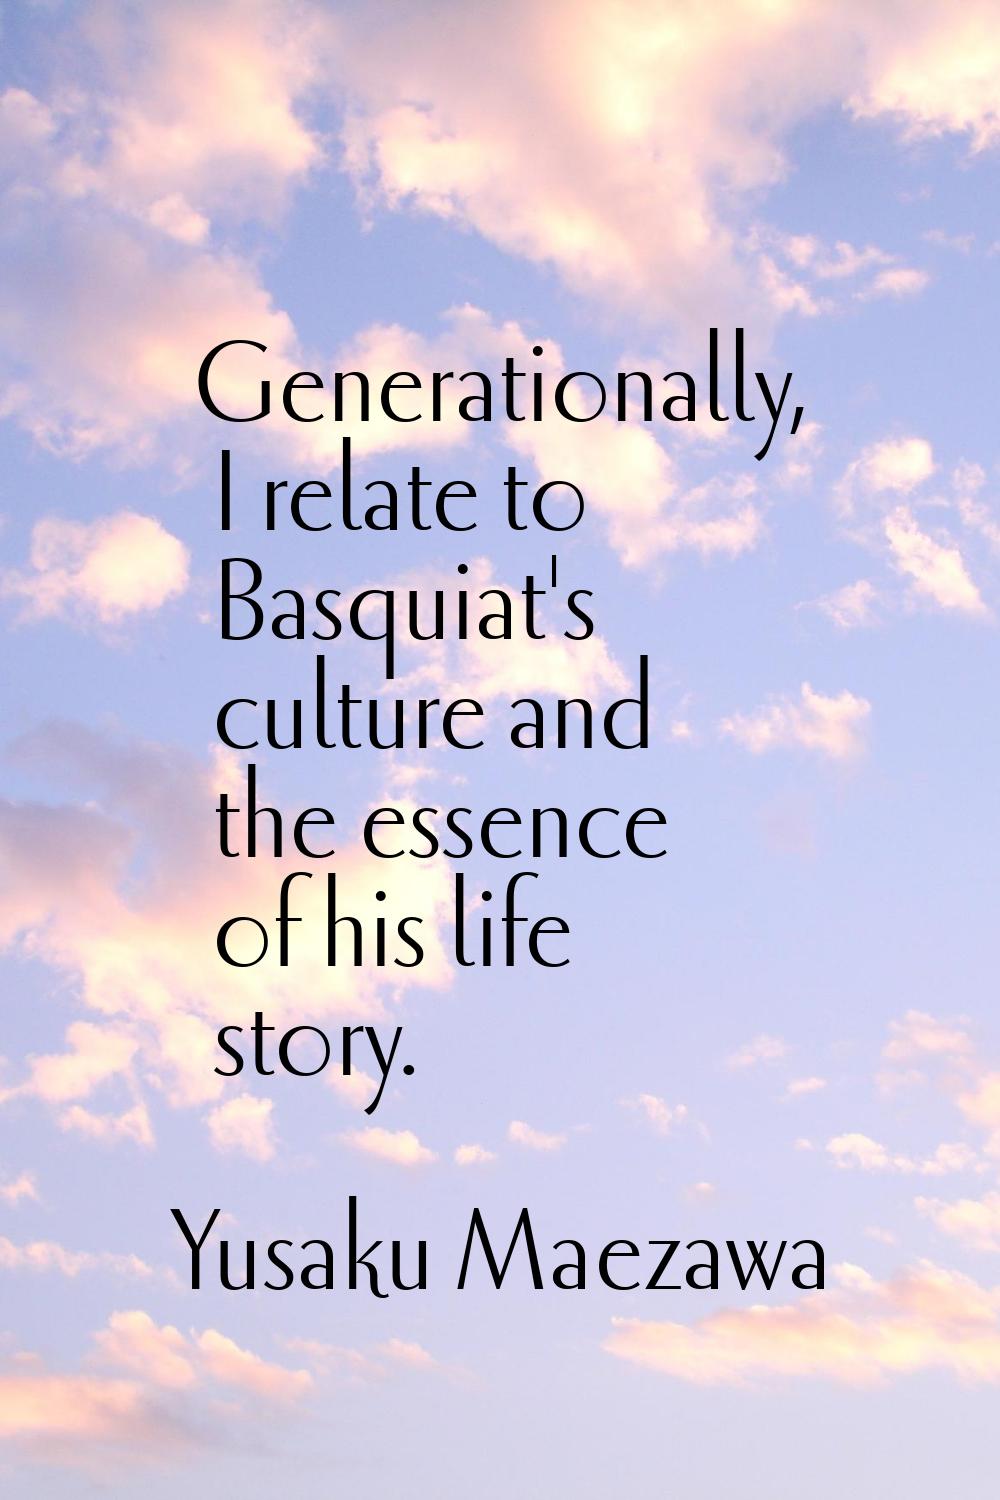 Generationally, I relate to Basquiat's culture and the essence of his life story.